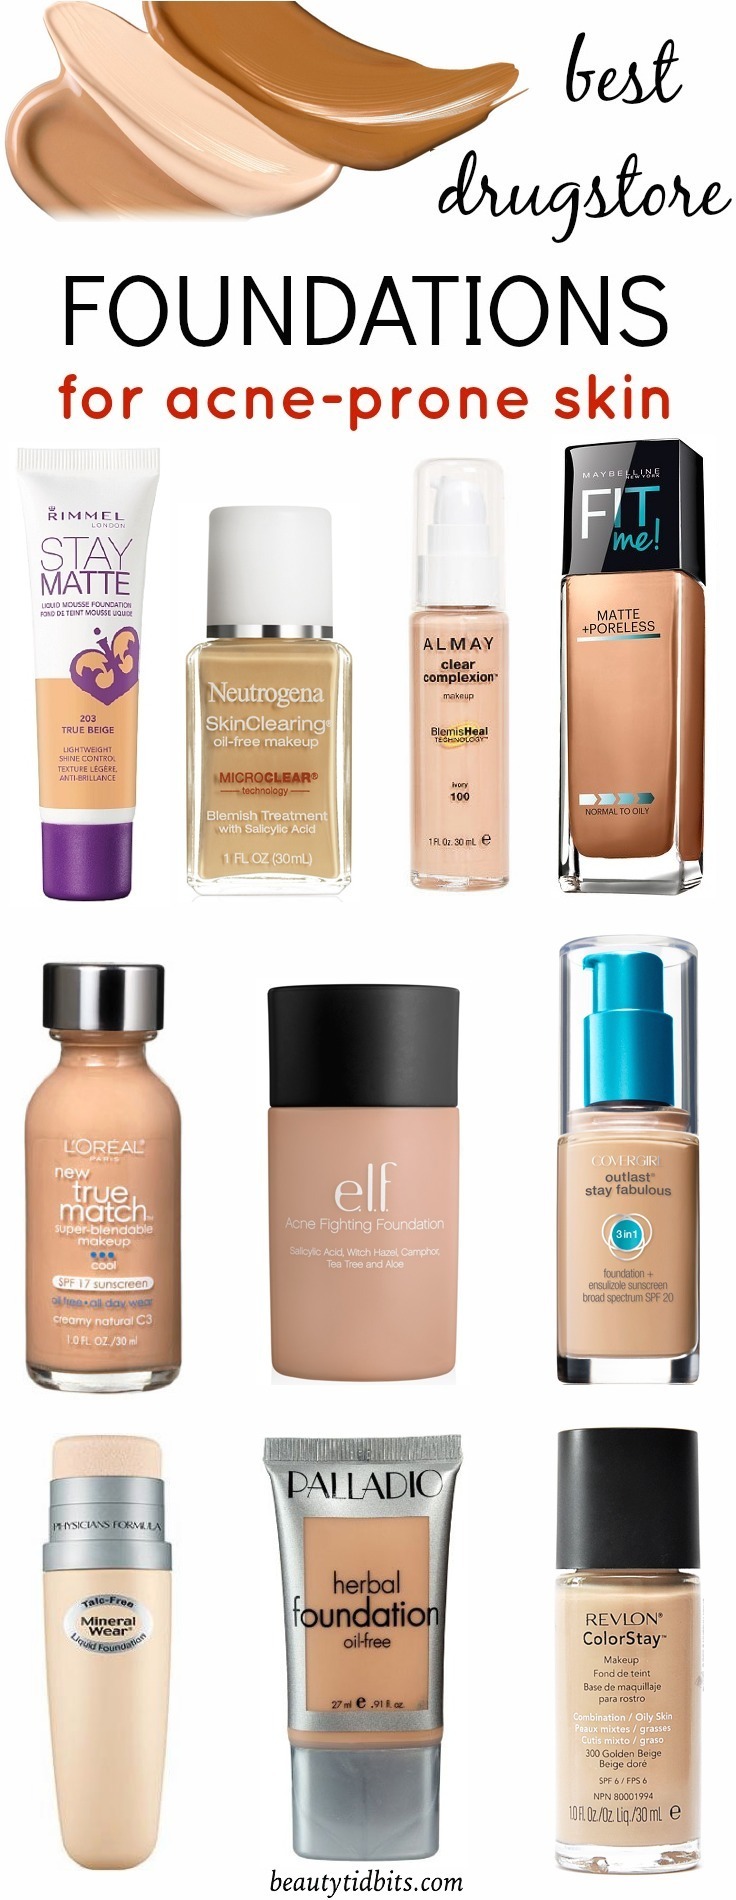 Battling breakouts? Heal & conceal it with these best drugstore foundations for oily, acne-prone skin. Each of these offer all day shine-free, lightweight coverage that lets skin breathe and won't clog pores.